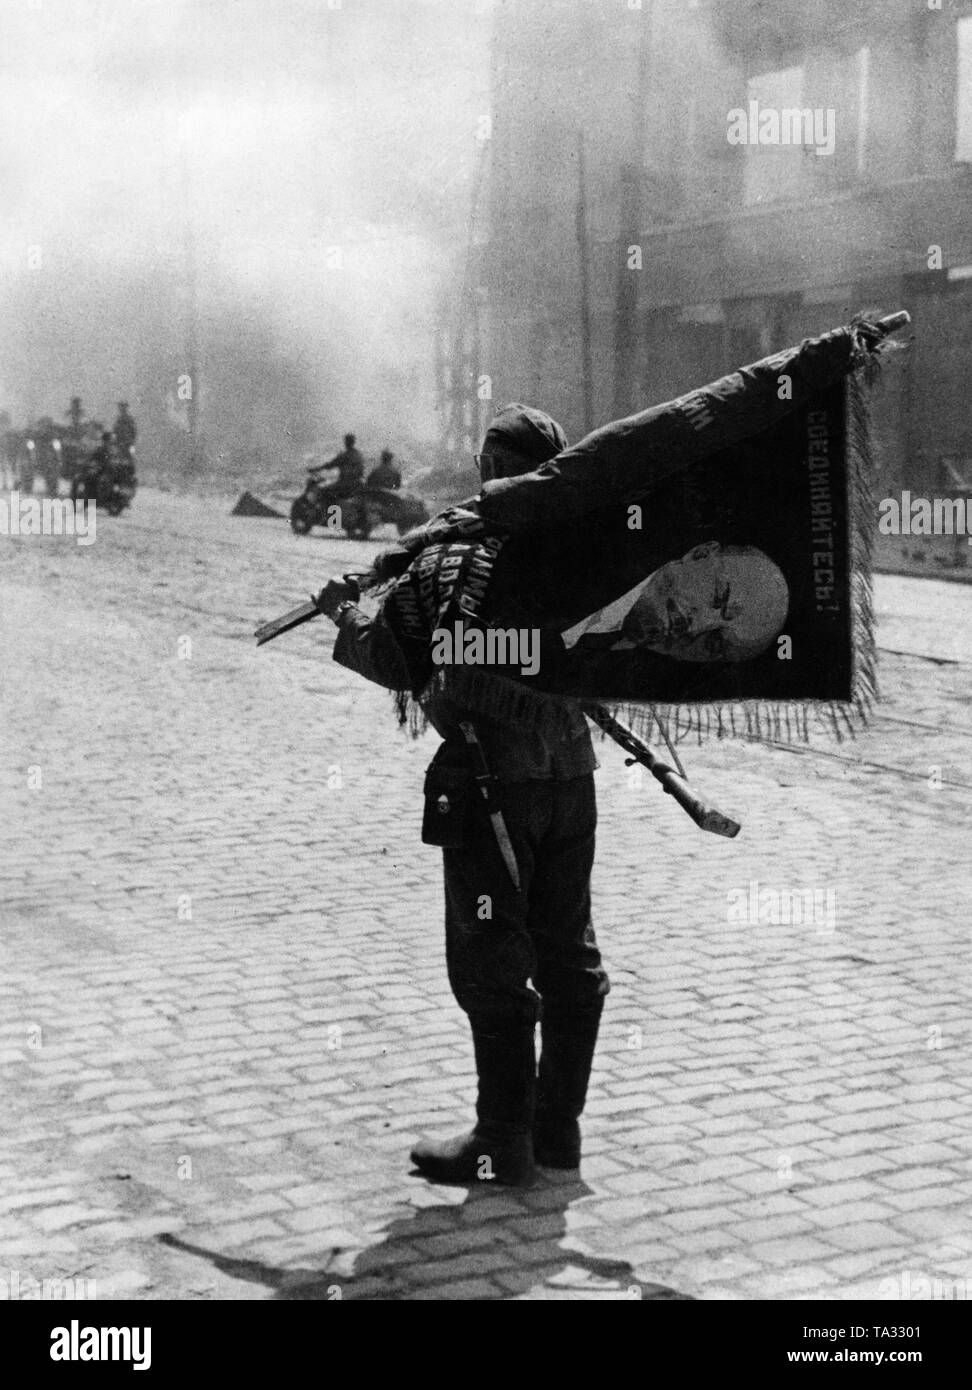 A soldier of the Wehrmacht with a captured Lenin flag after the conquest of Brest Litovsk. Stock Photo